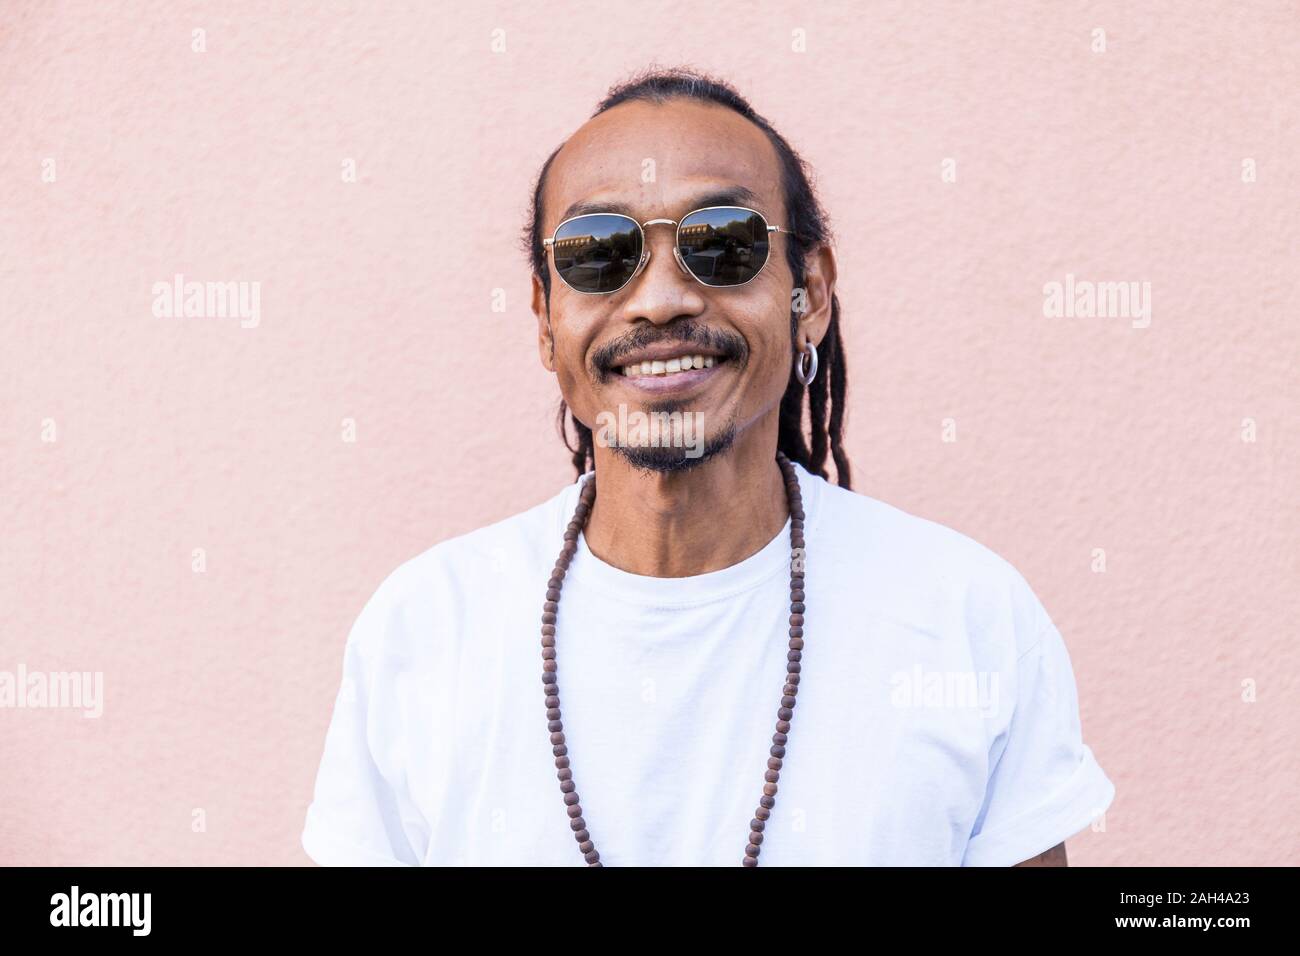 Portrait of smiling mature man with dreadlocks and sunglasses Stock Photo